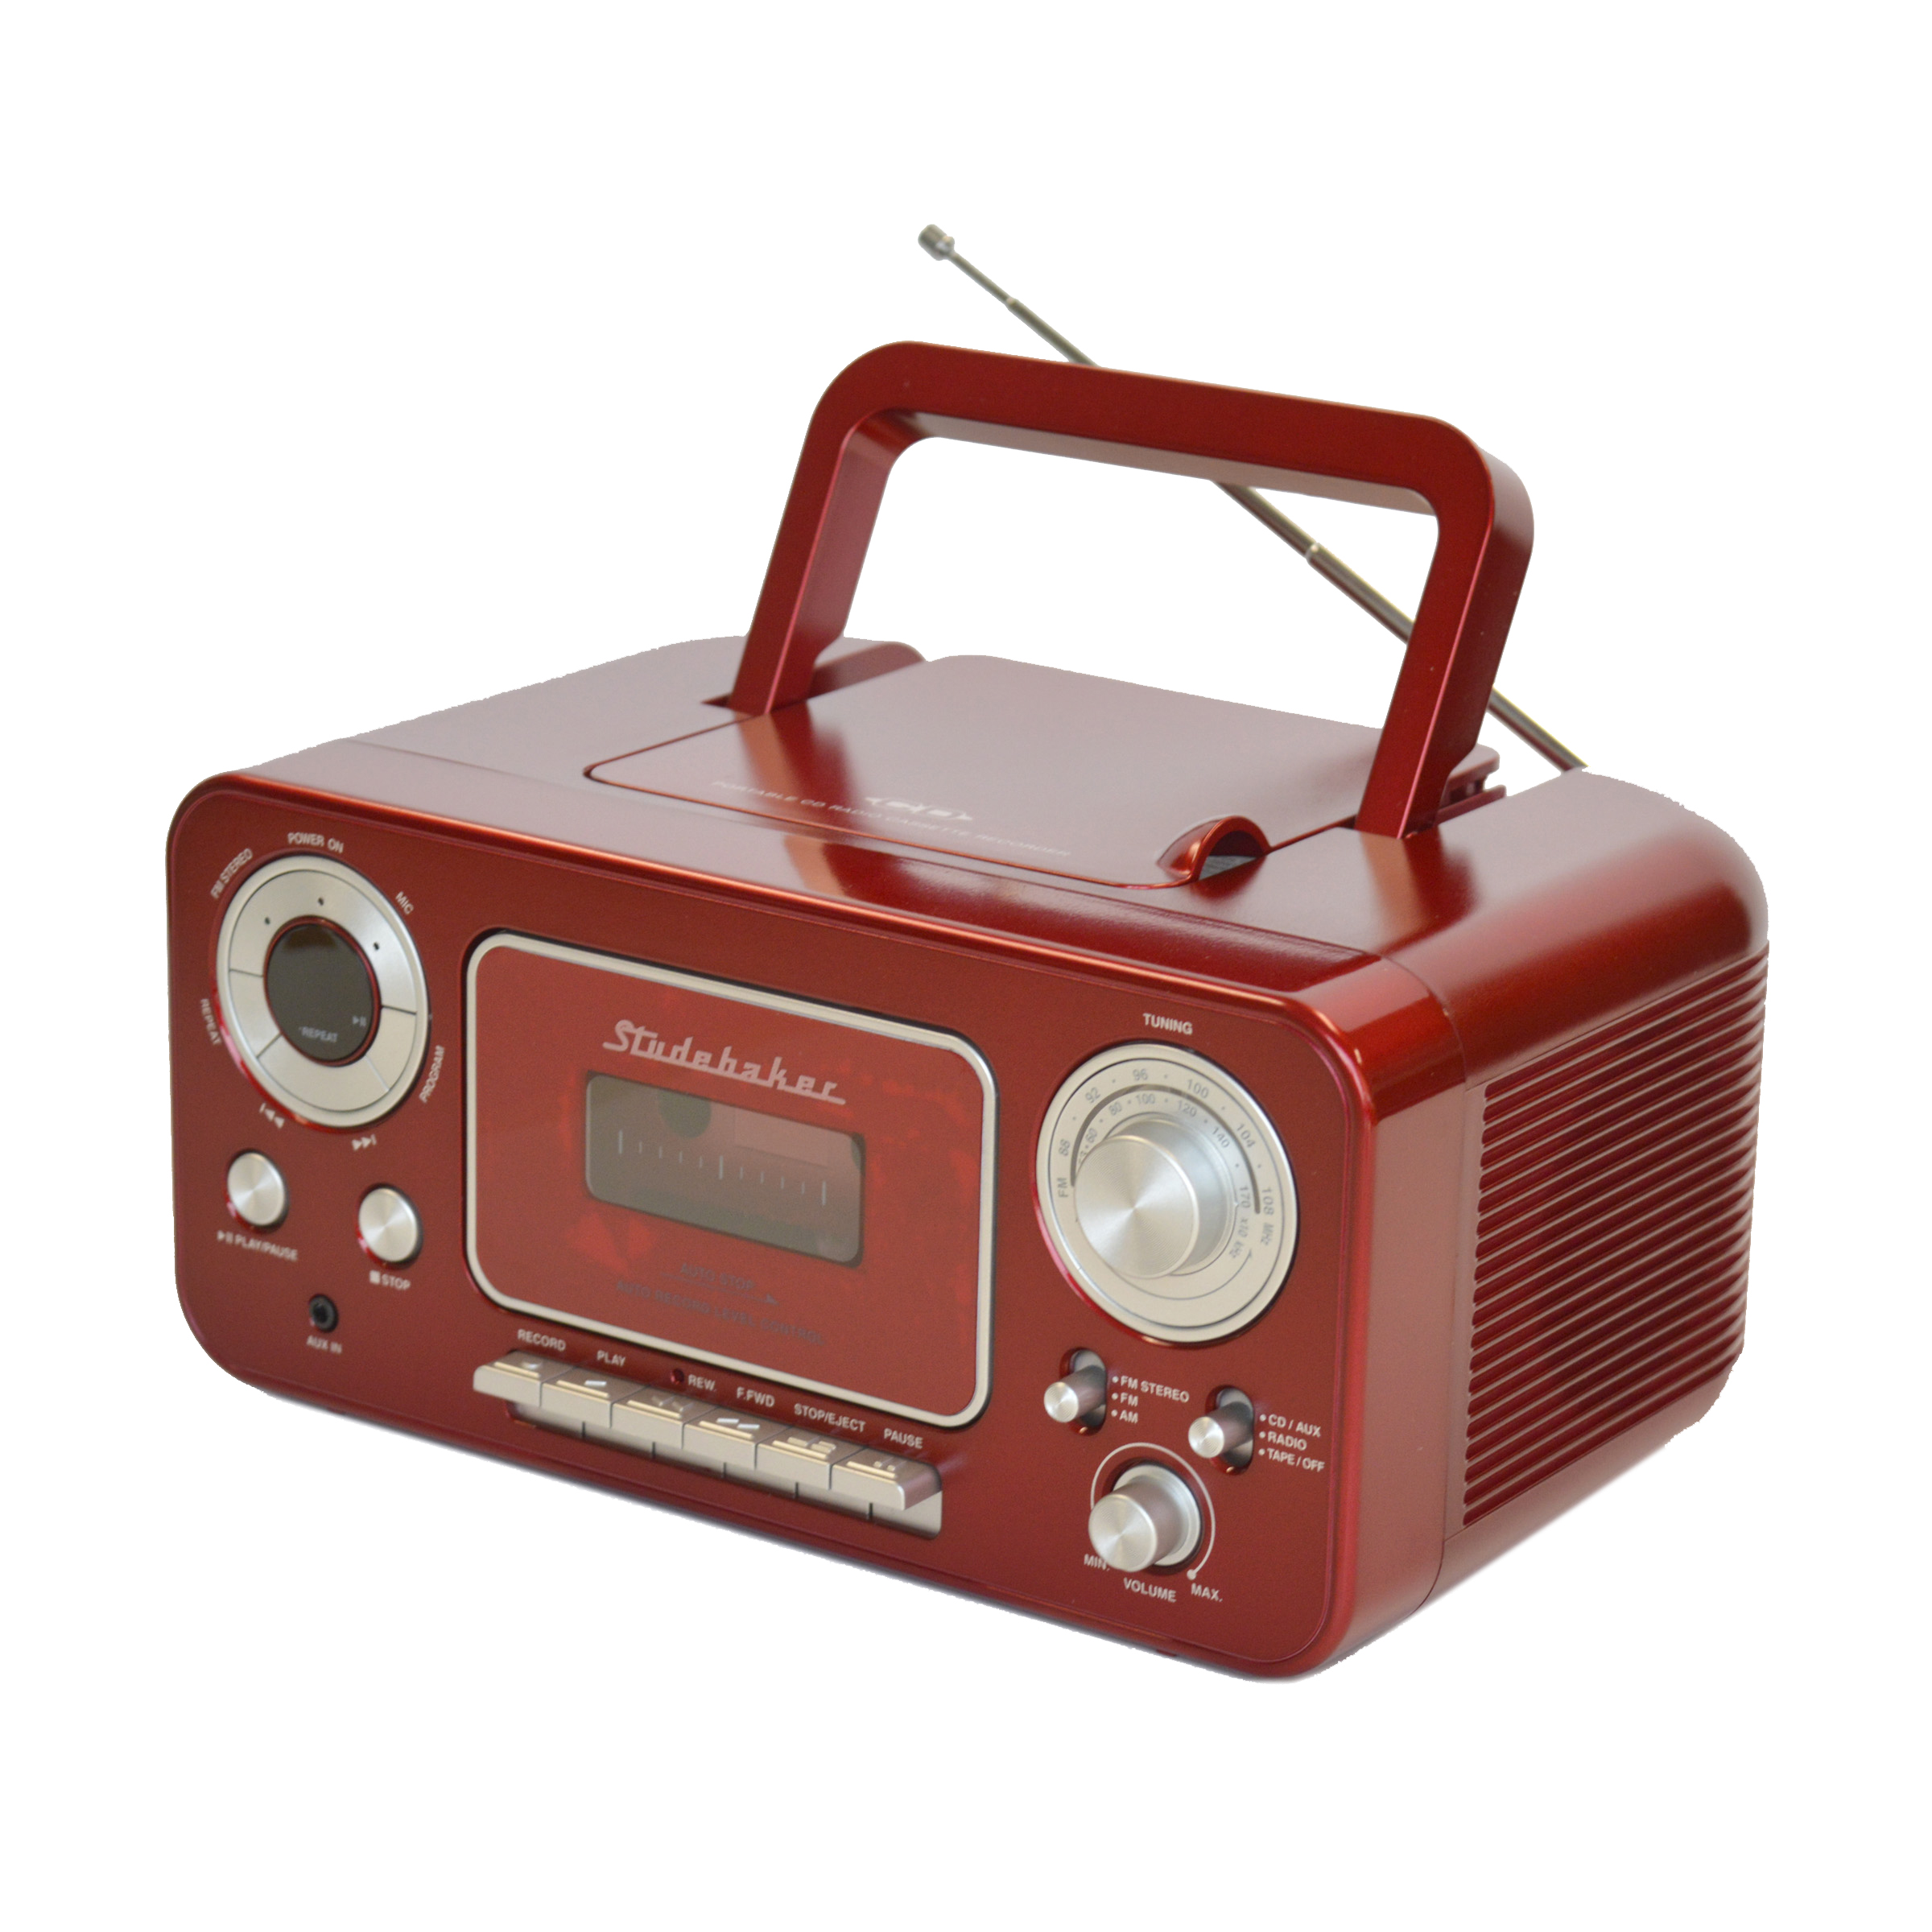 Portable Stereo CD Player with AM/FM Radio and Cassette Player/Recorder - image 1 of 5